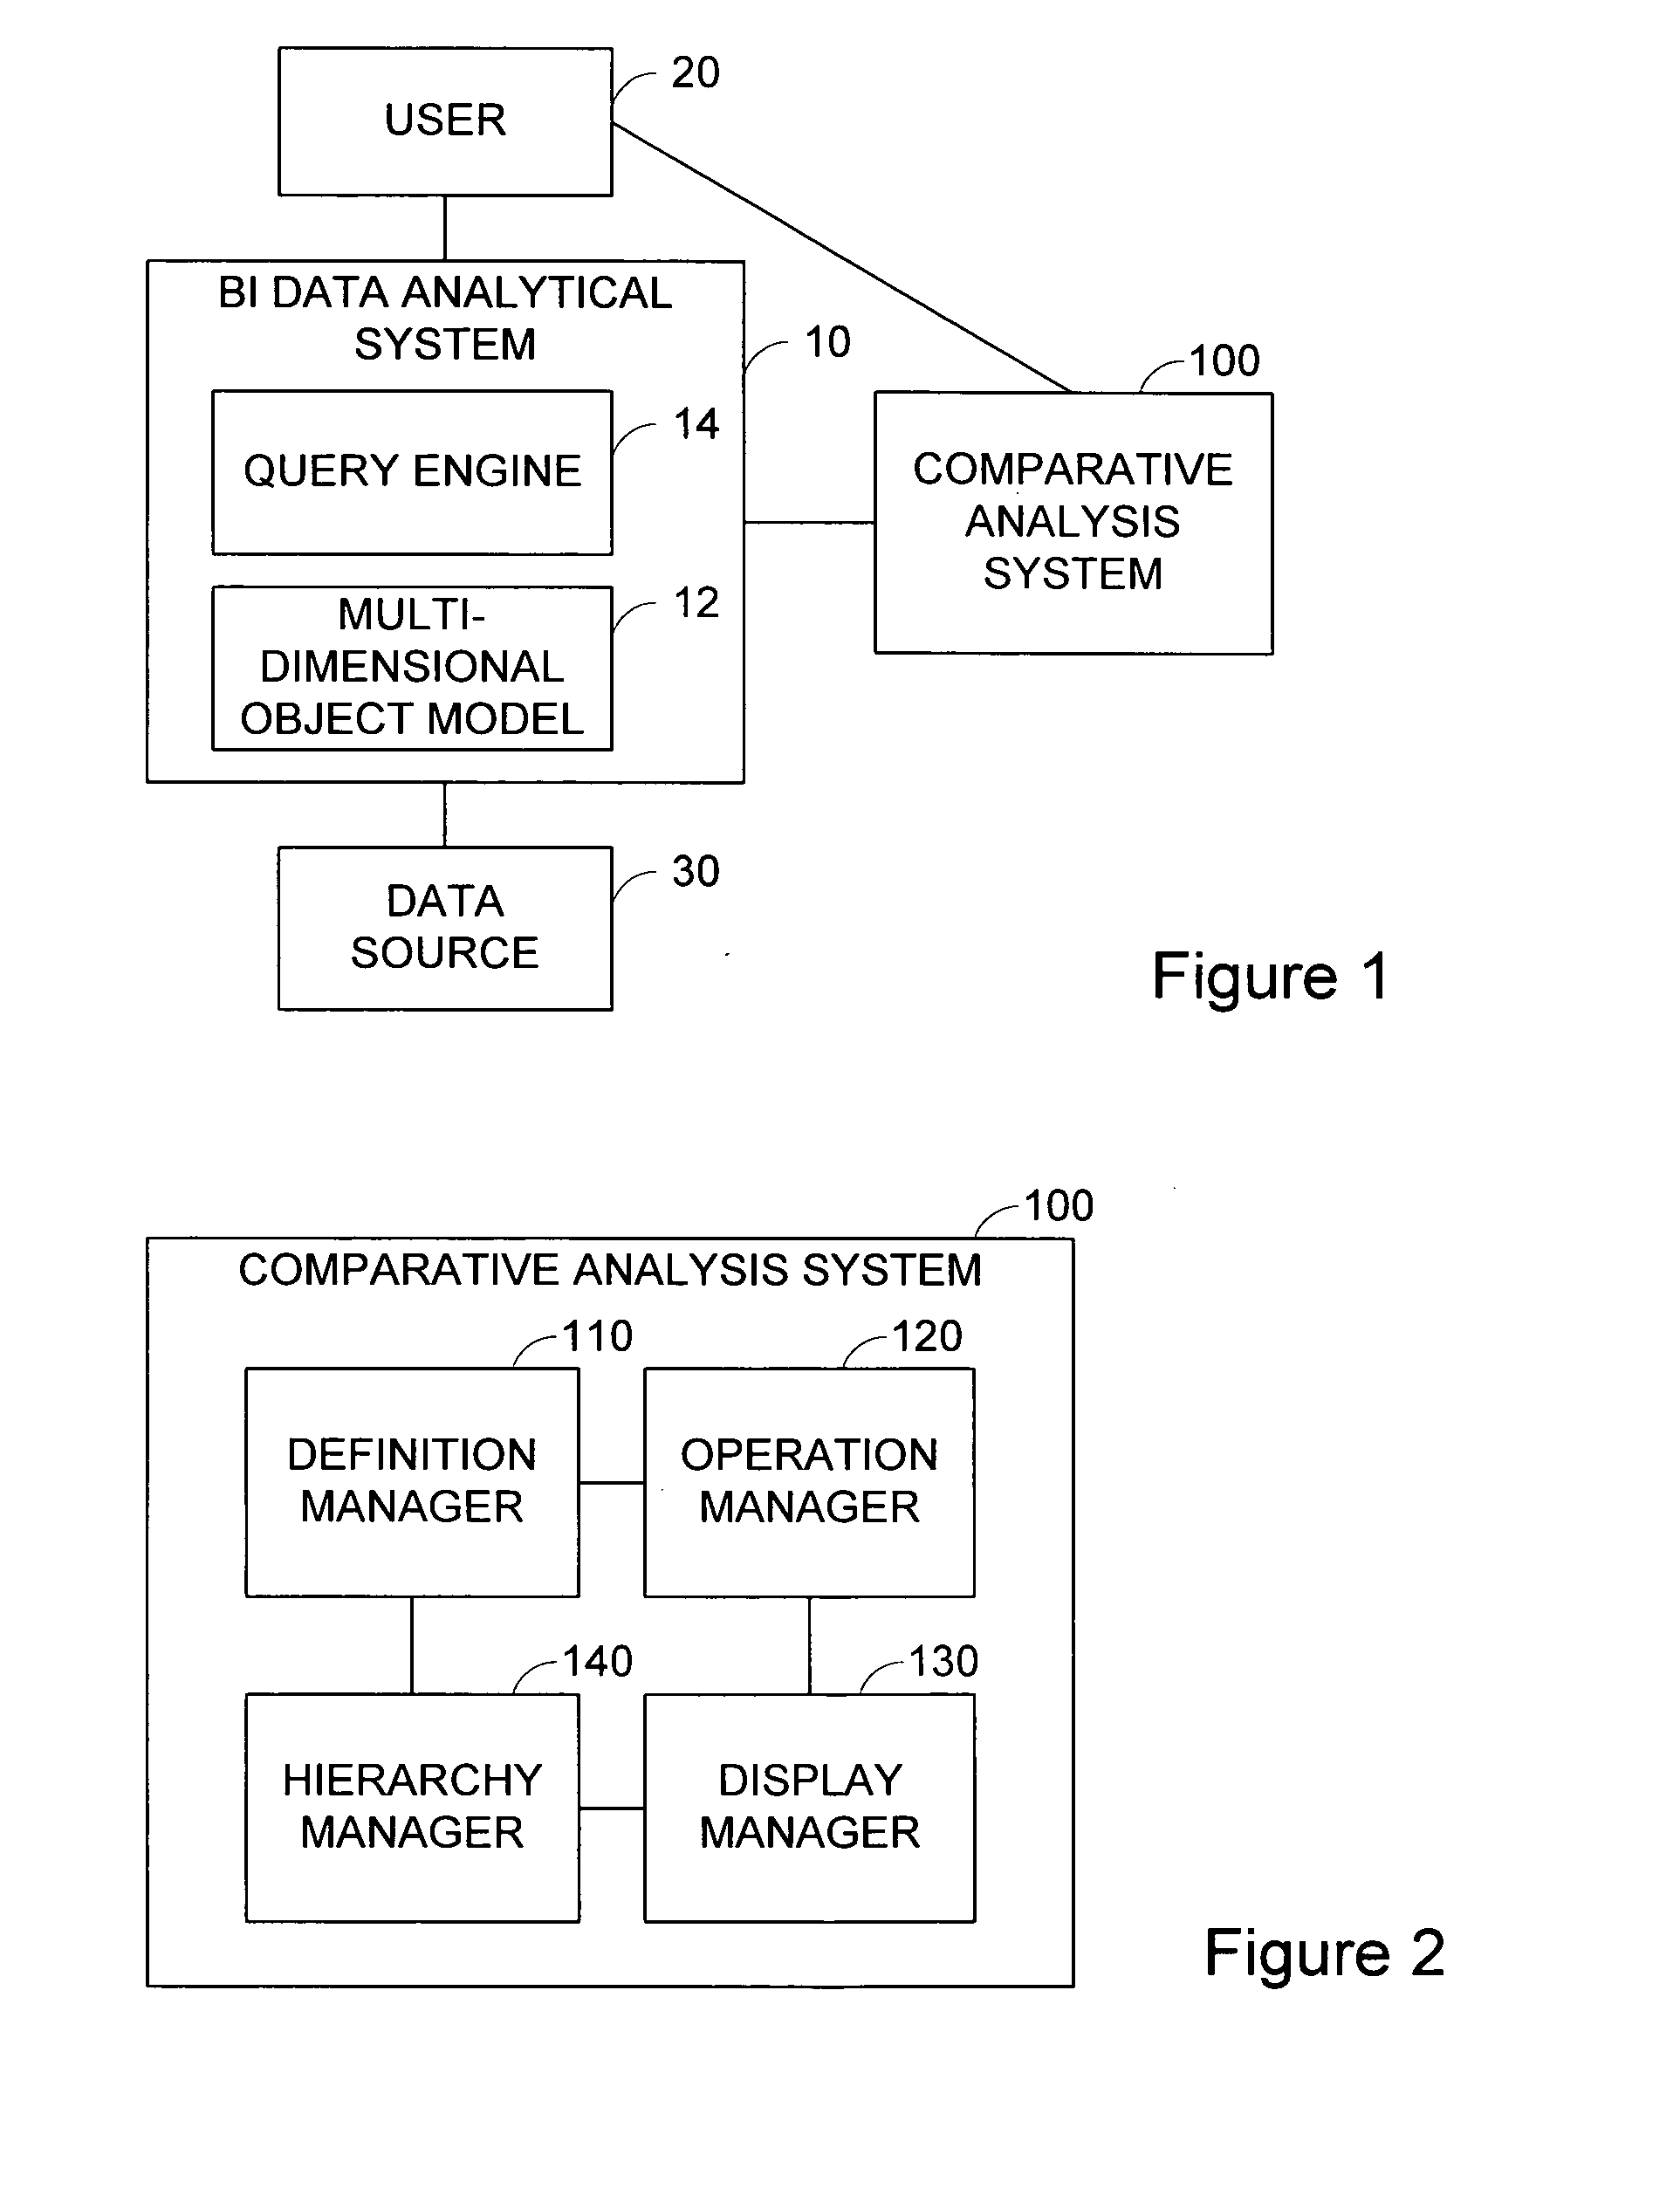 System and method for comparative analysis of business intelligence data